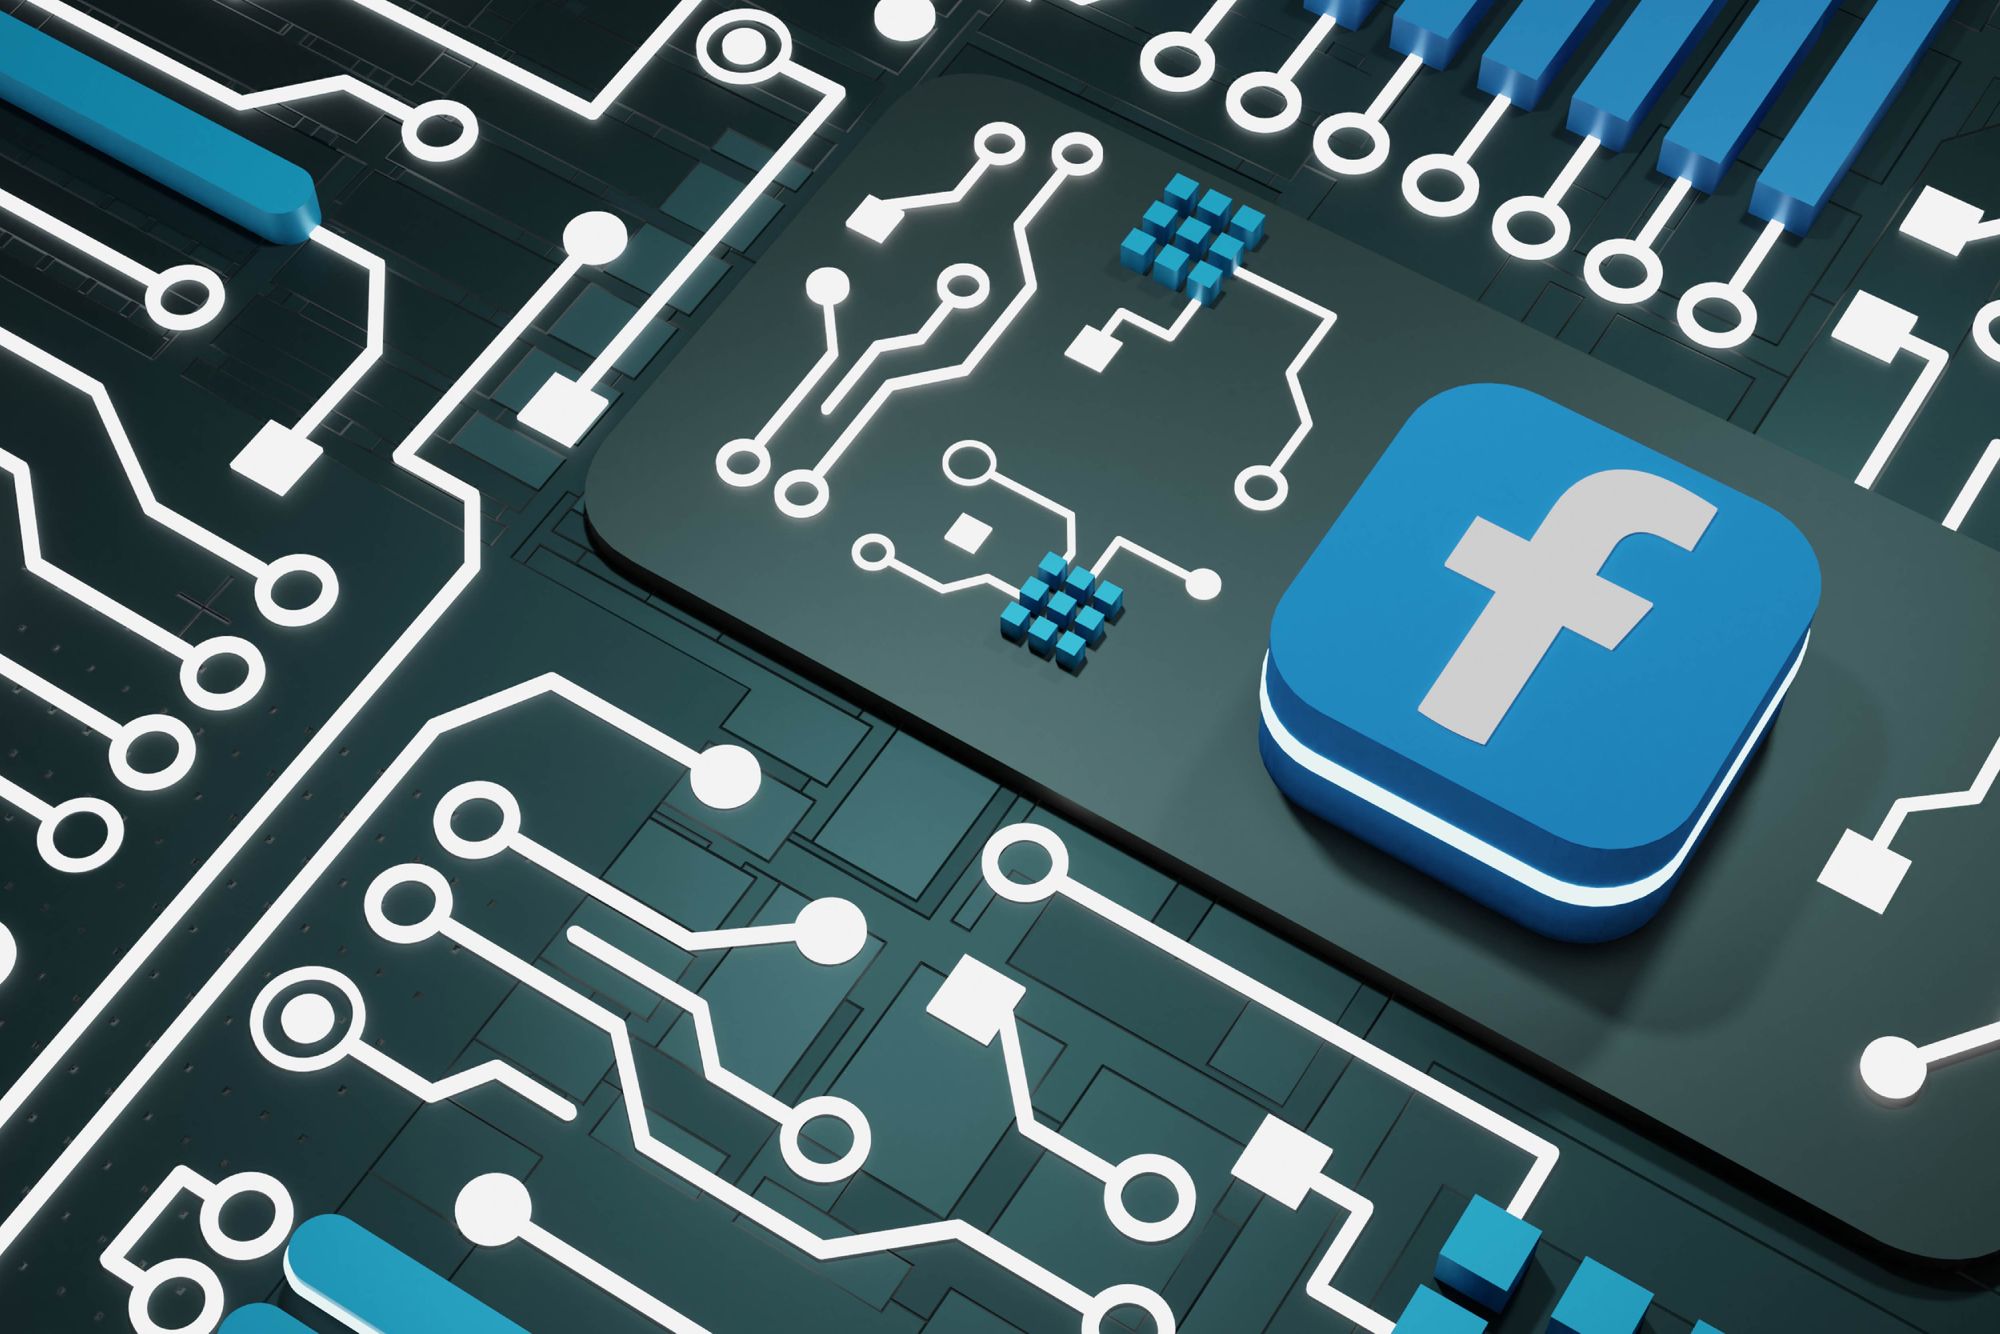 Facebook Faces Legal Action for Allowing Crypto Scam Advertisement